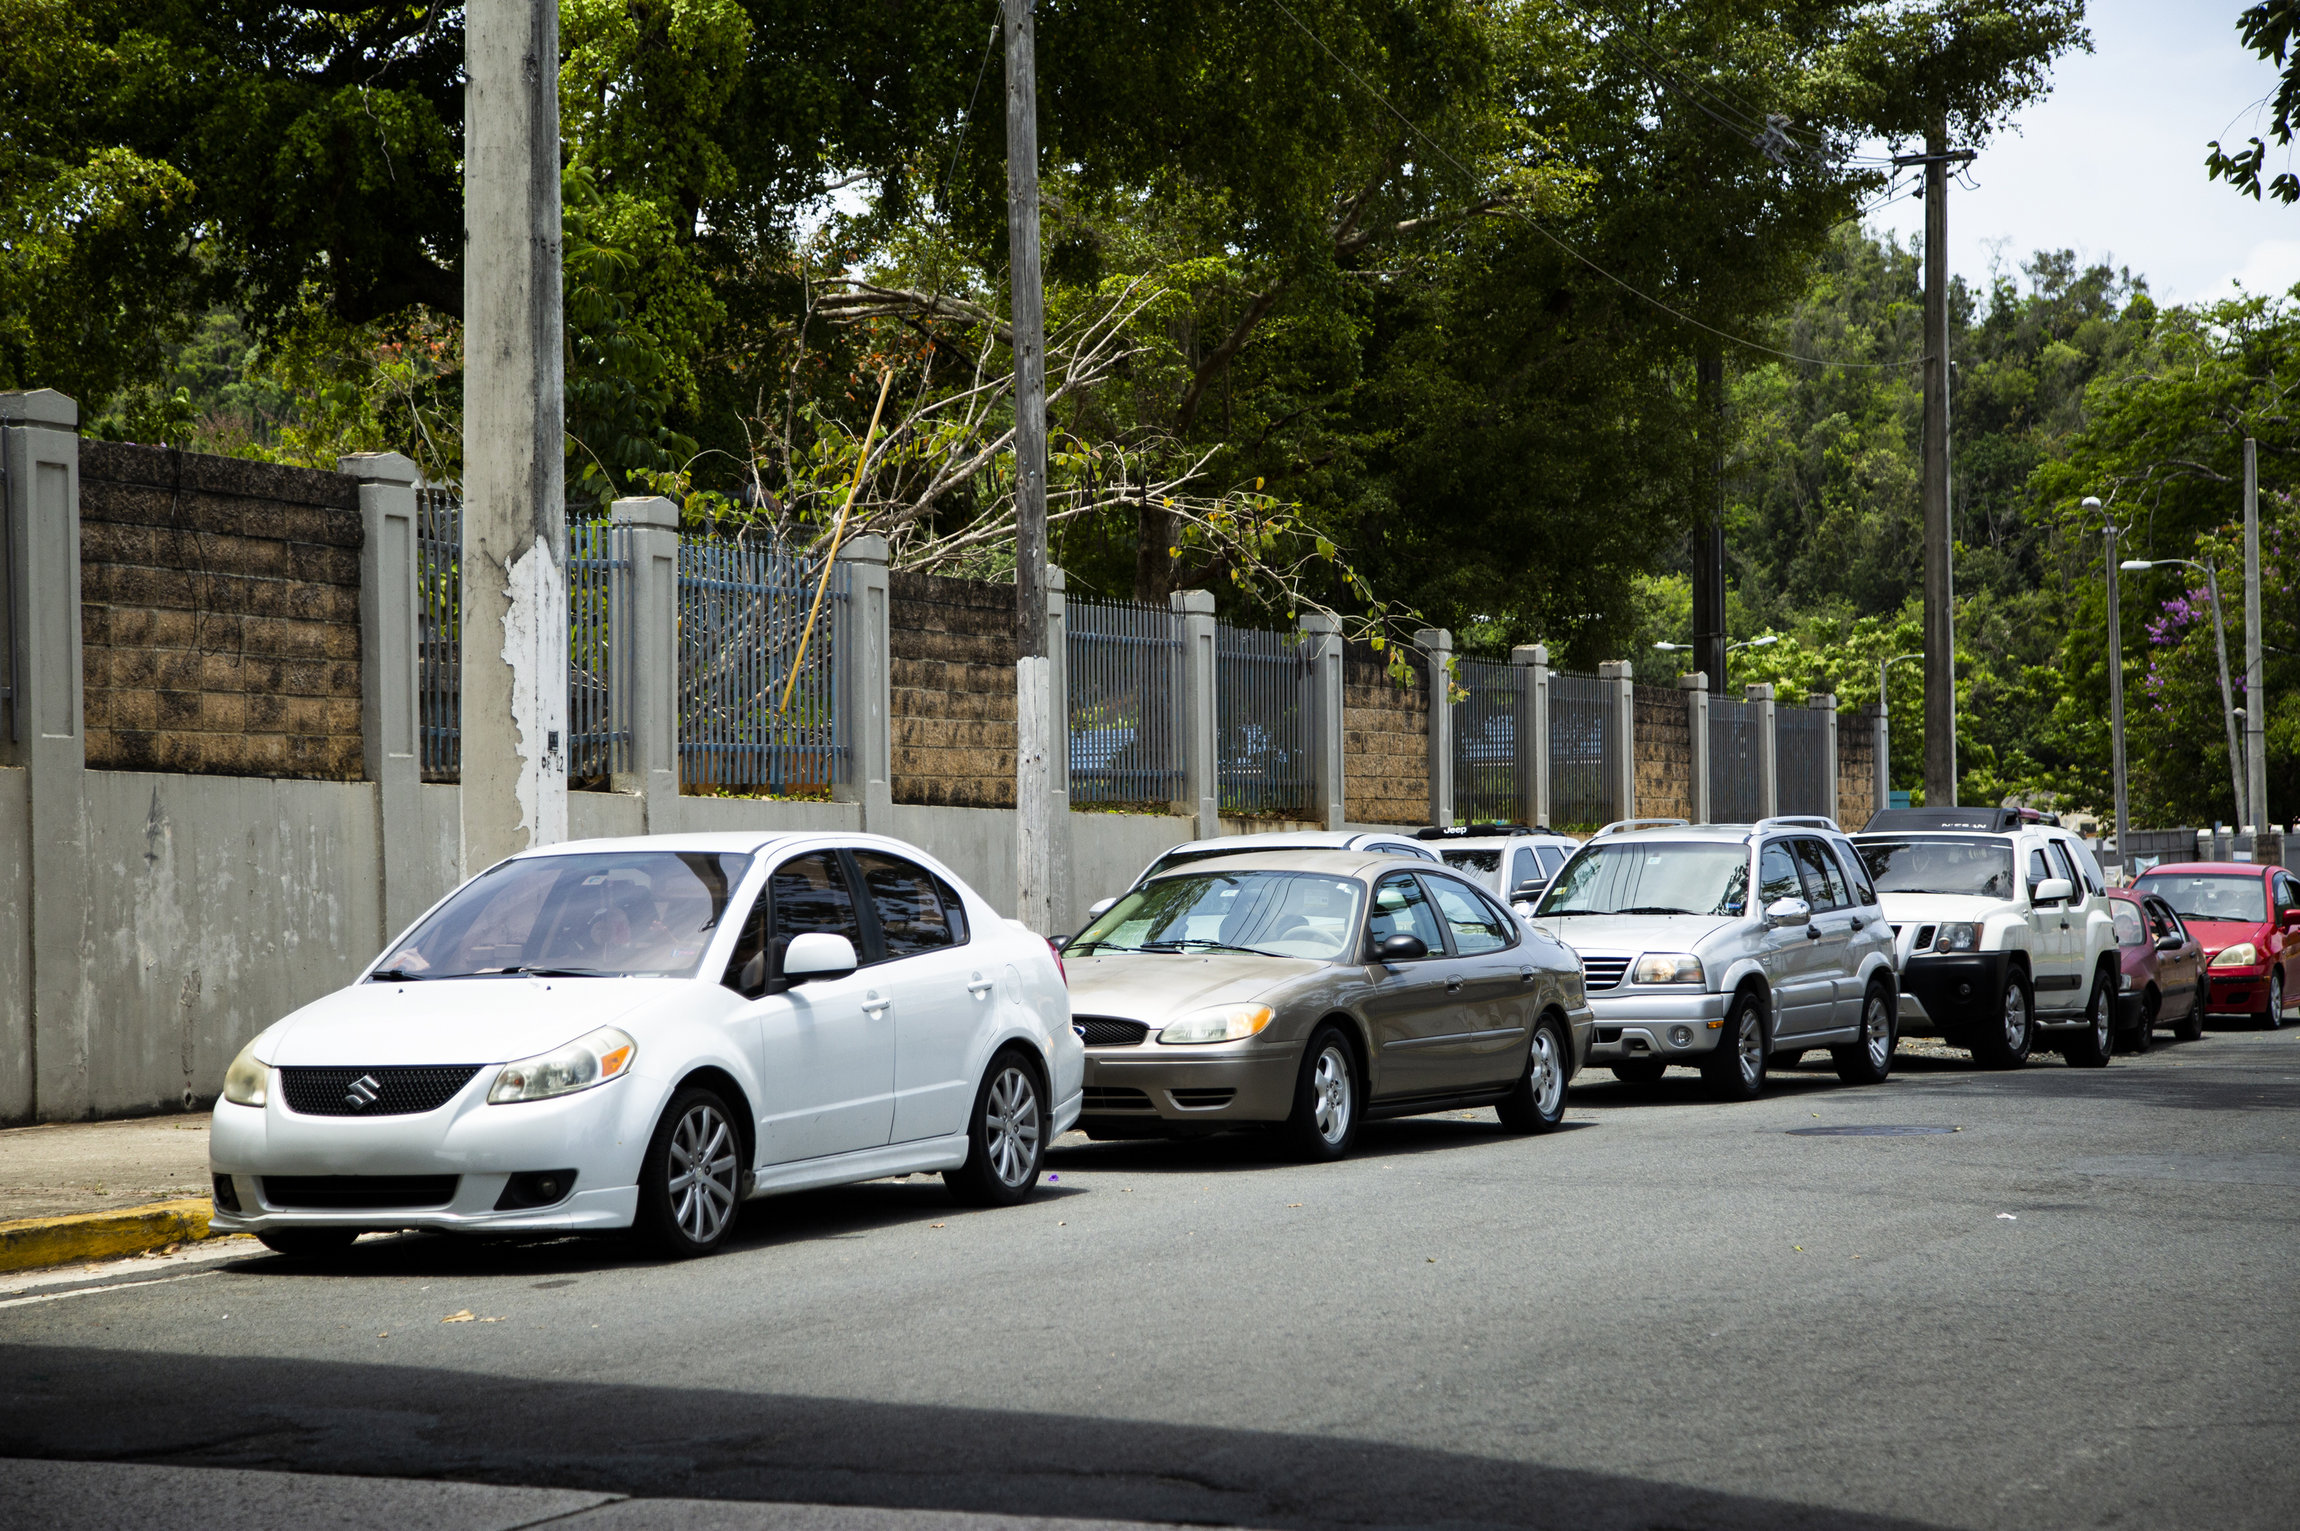 A line of cars, bumper to bumber, on a road next to a wall. Behind the wall is lush vegetation.